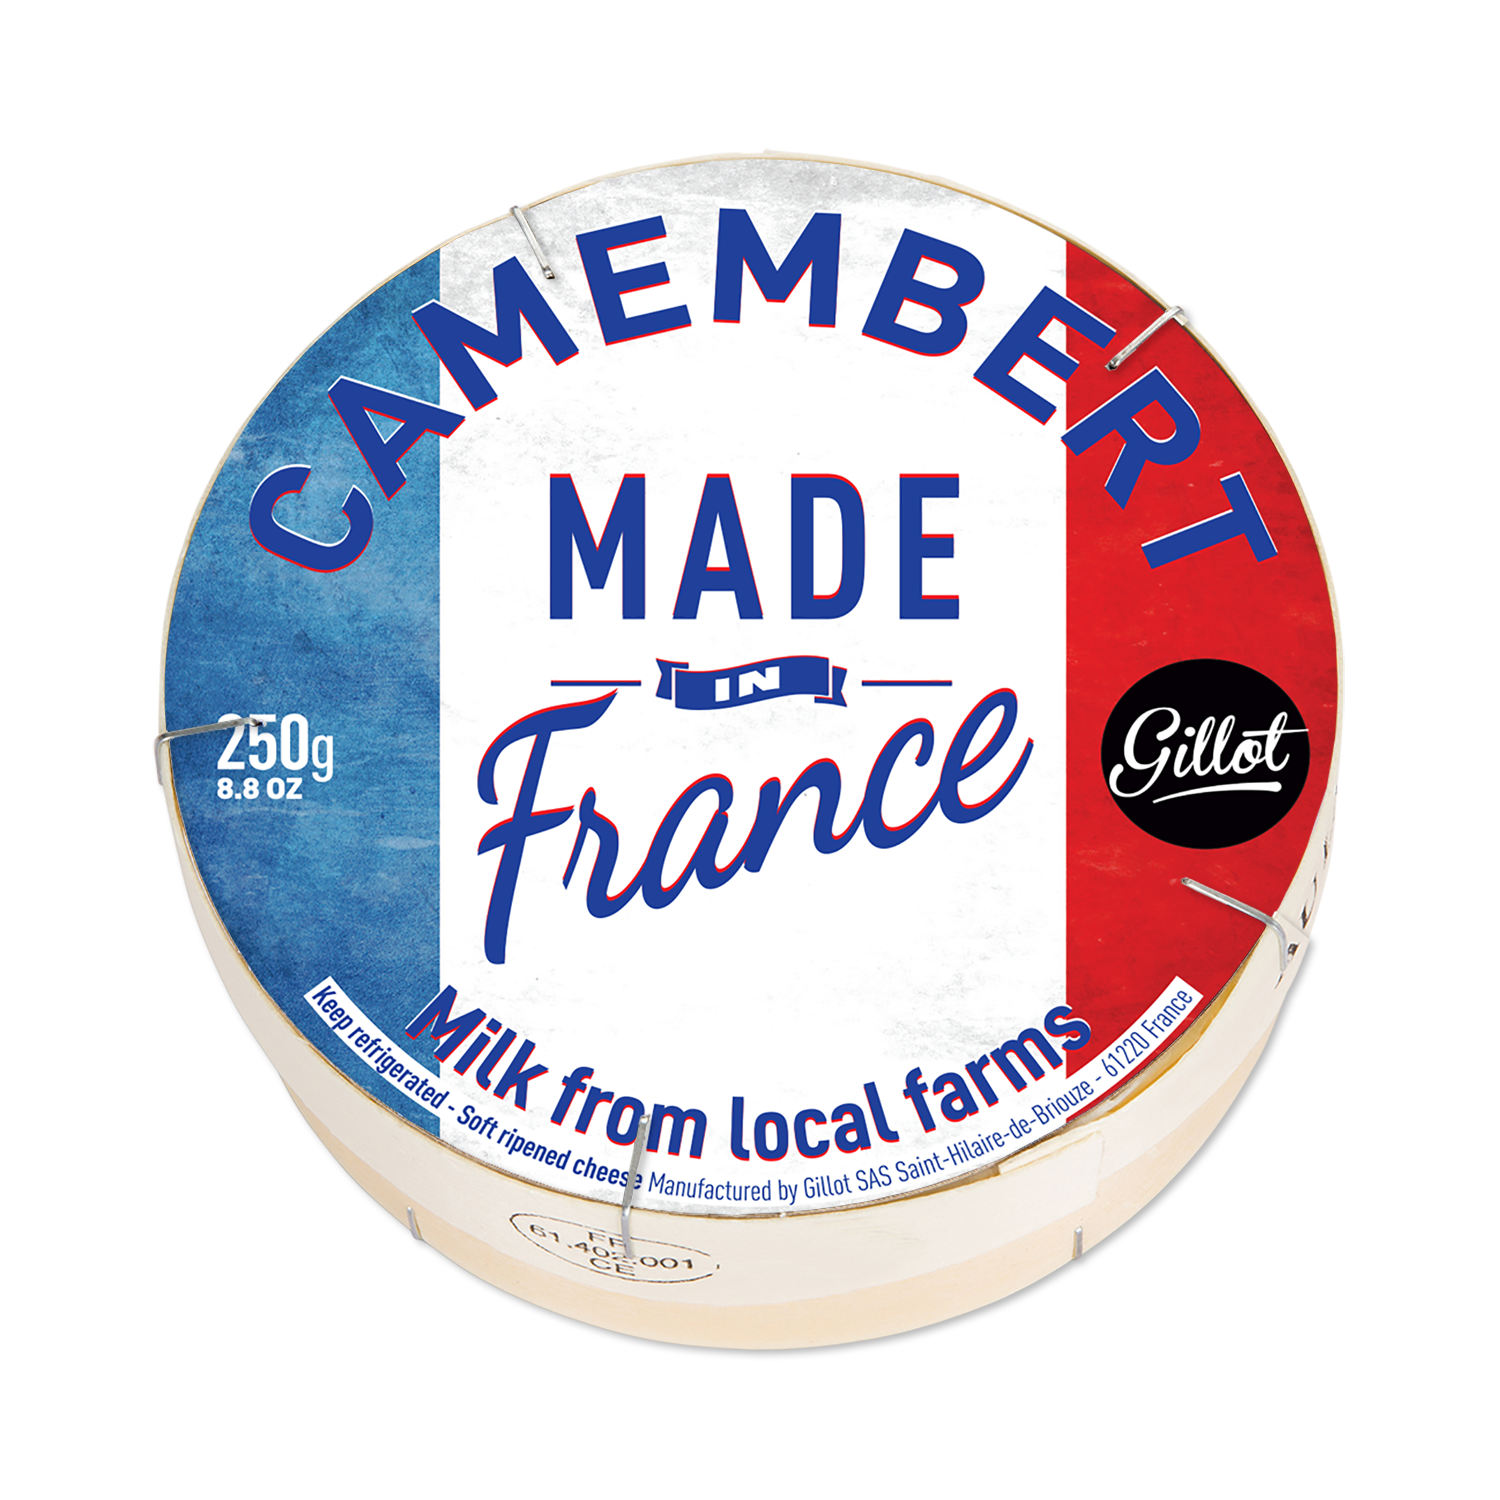 Camembert Frenchy